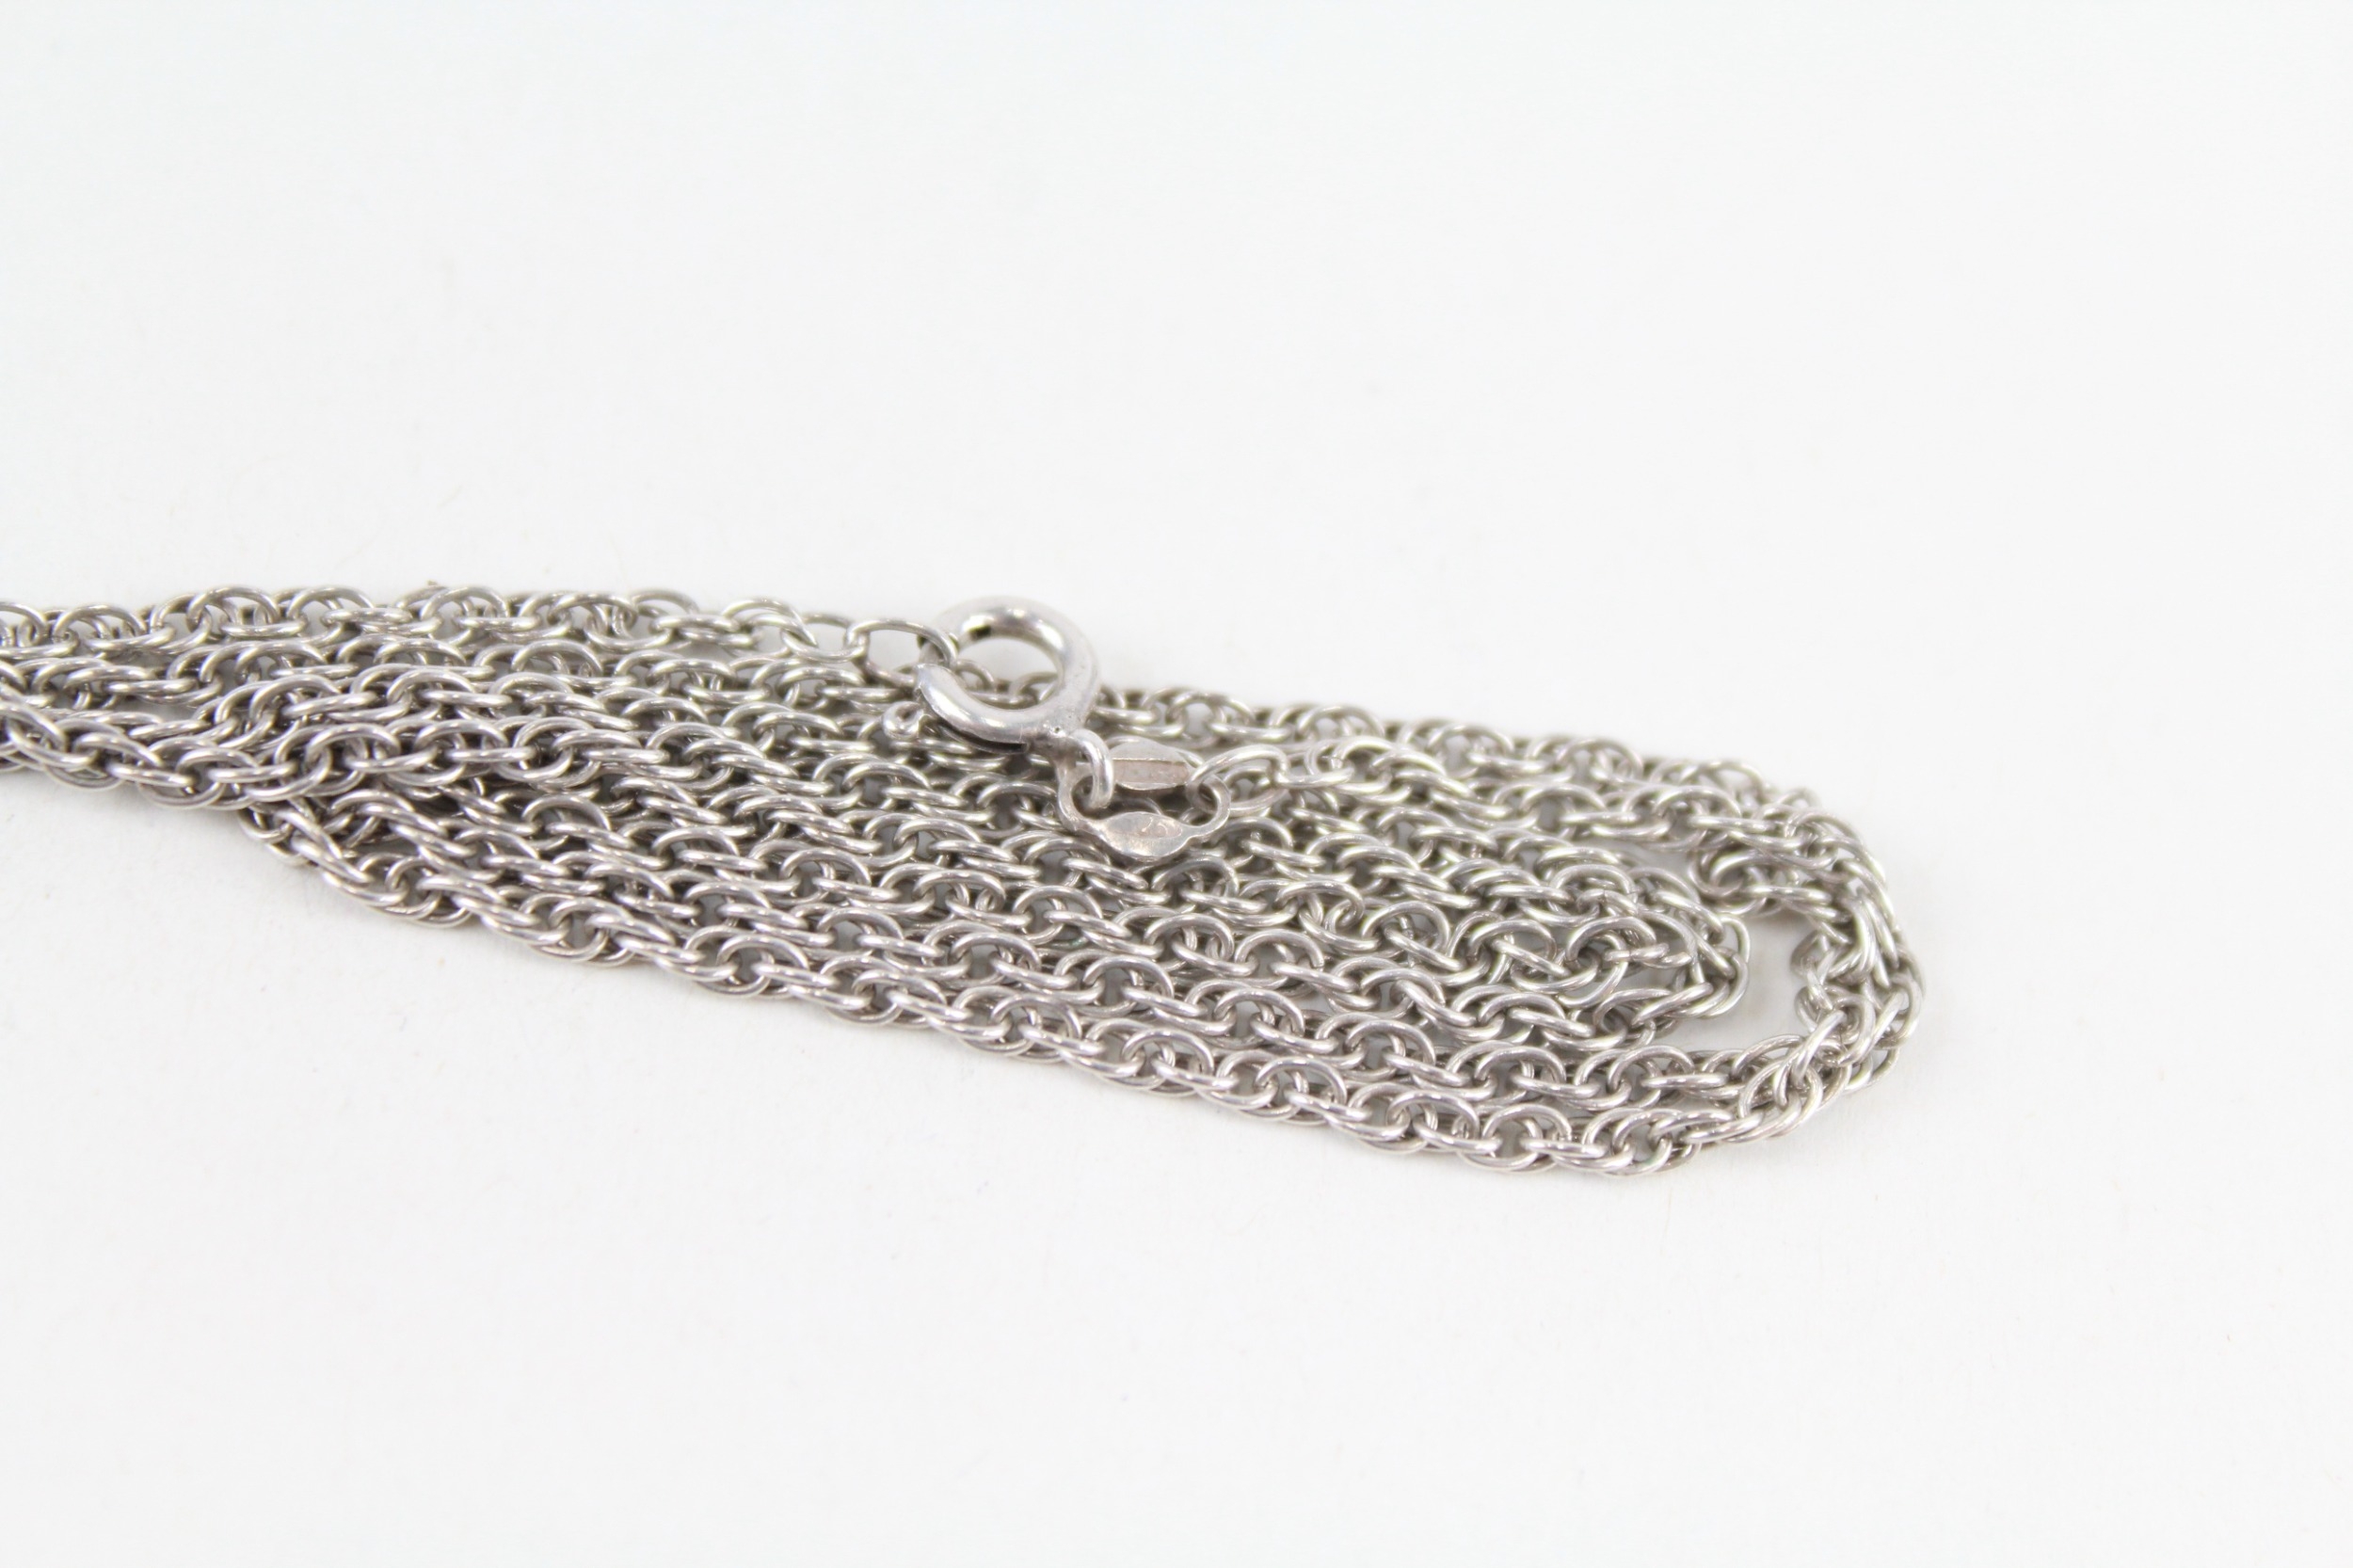 An antique novelty silver mirror pendant and chain (15g) - Image 4 of 4